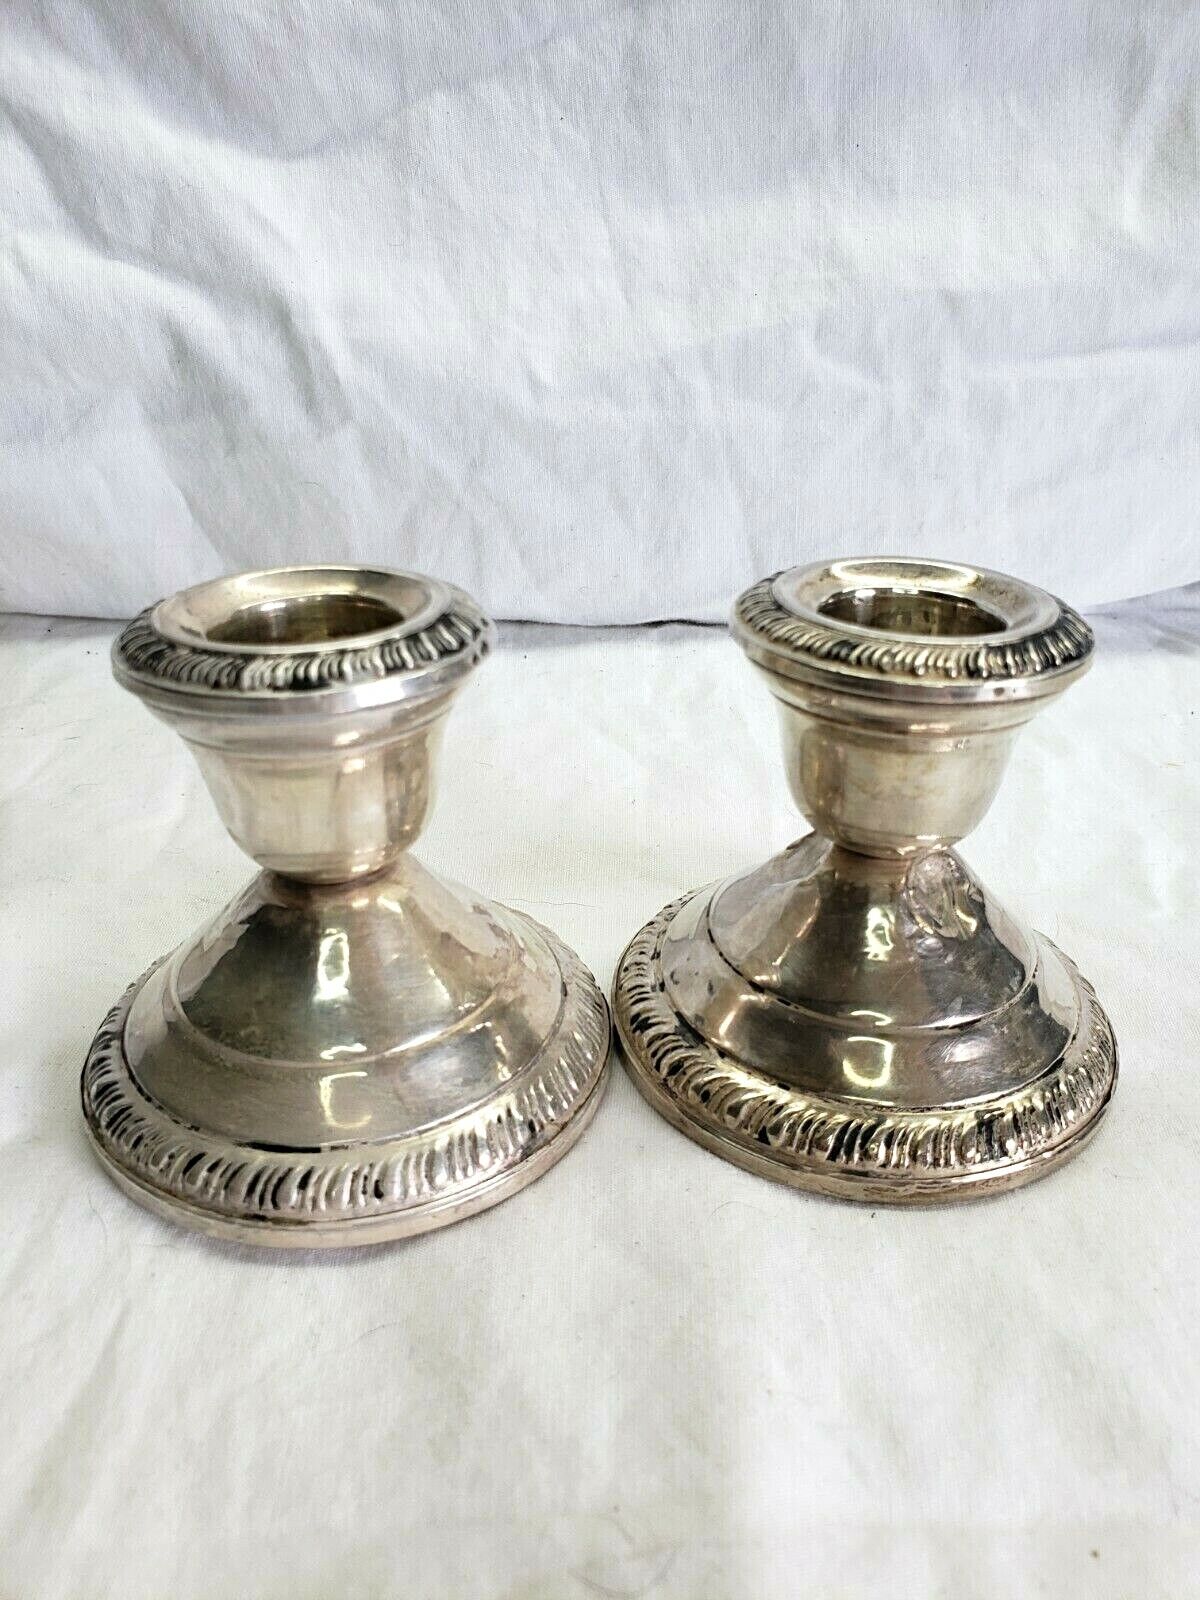 Vintage Stirling Silver Antique Candlestick Set sale Weighted Holders Ranking TOP4